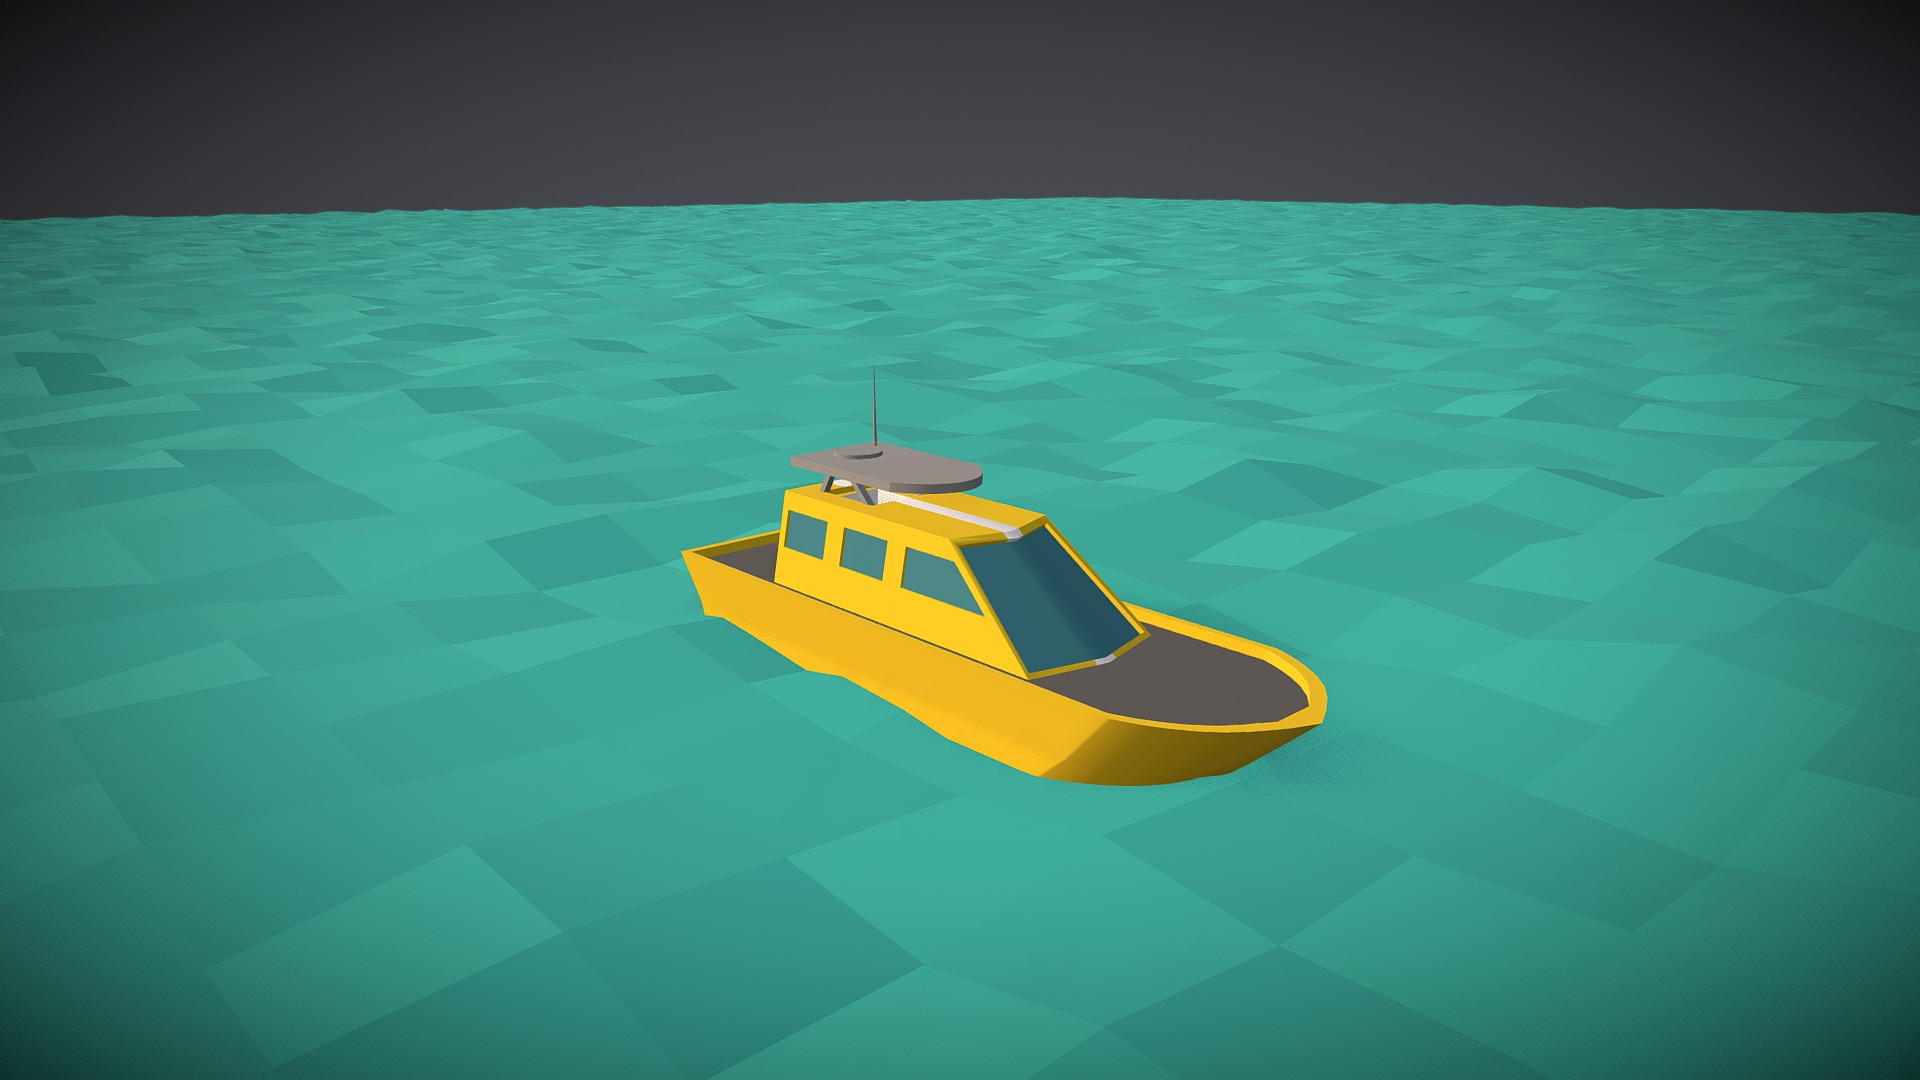 3D model Low-Poly Small Orange Boat - This is a 3D model of the Low-Poly Small Orange Boat. The 3D model is about logo.